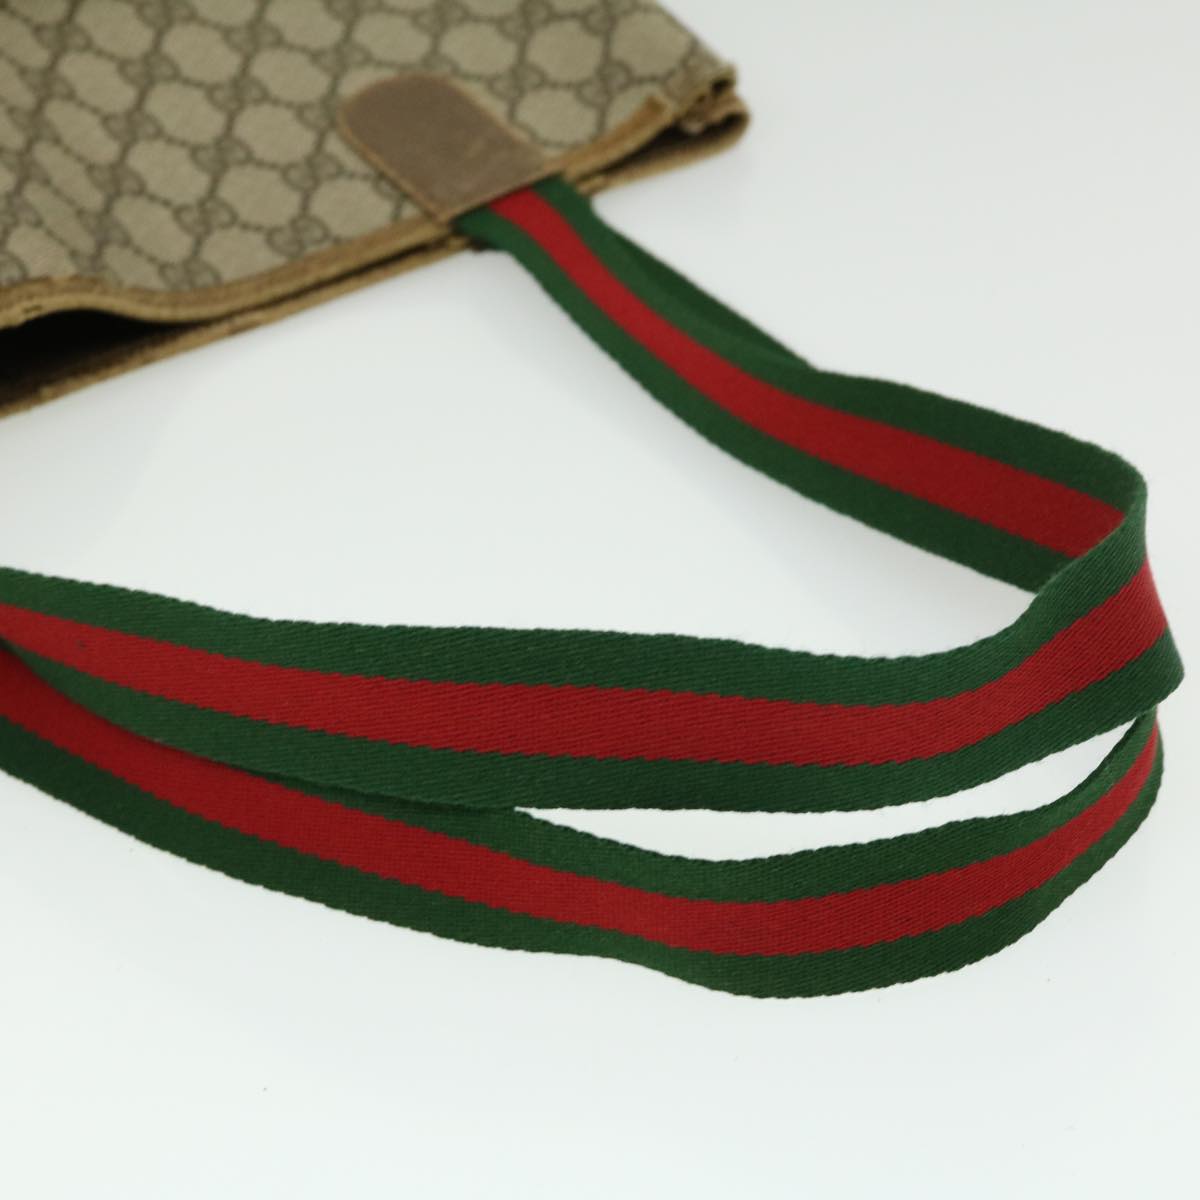 GUCCI Web Sherry Line GG Canvas Tote Bag Red Green Brown Auth ki1846